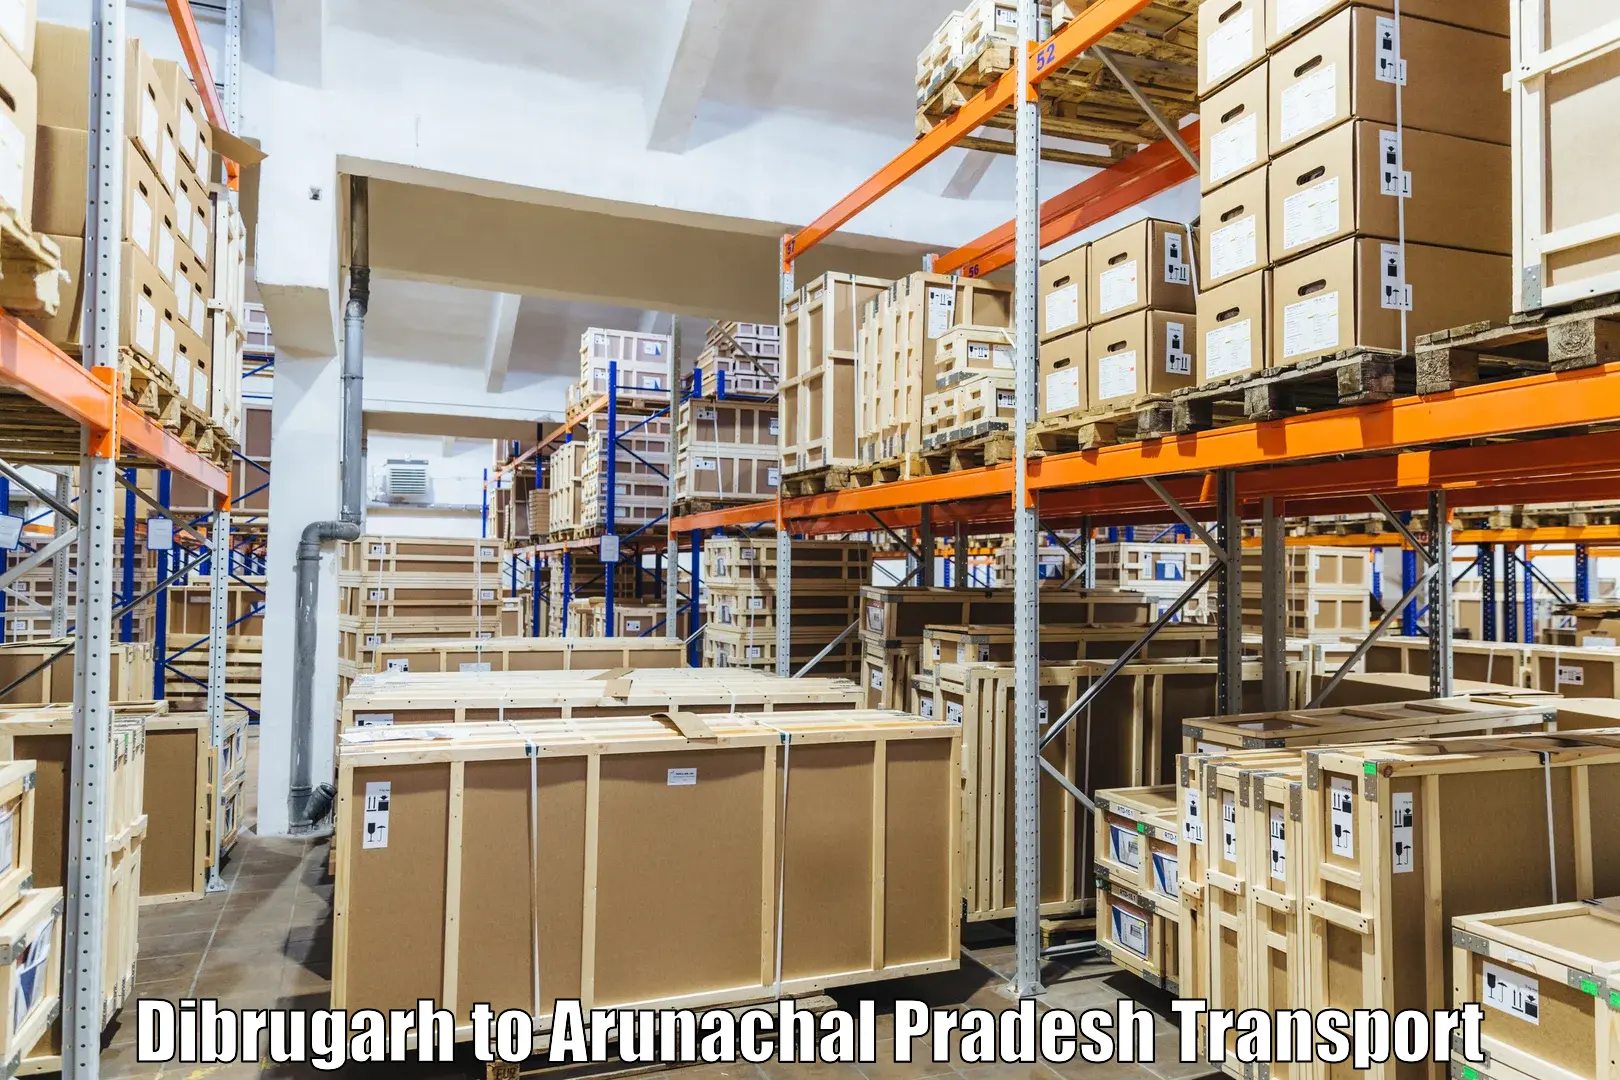 Air freight transport services in Dibrugarh to Changlang